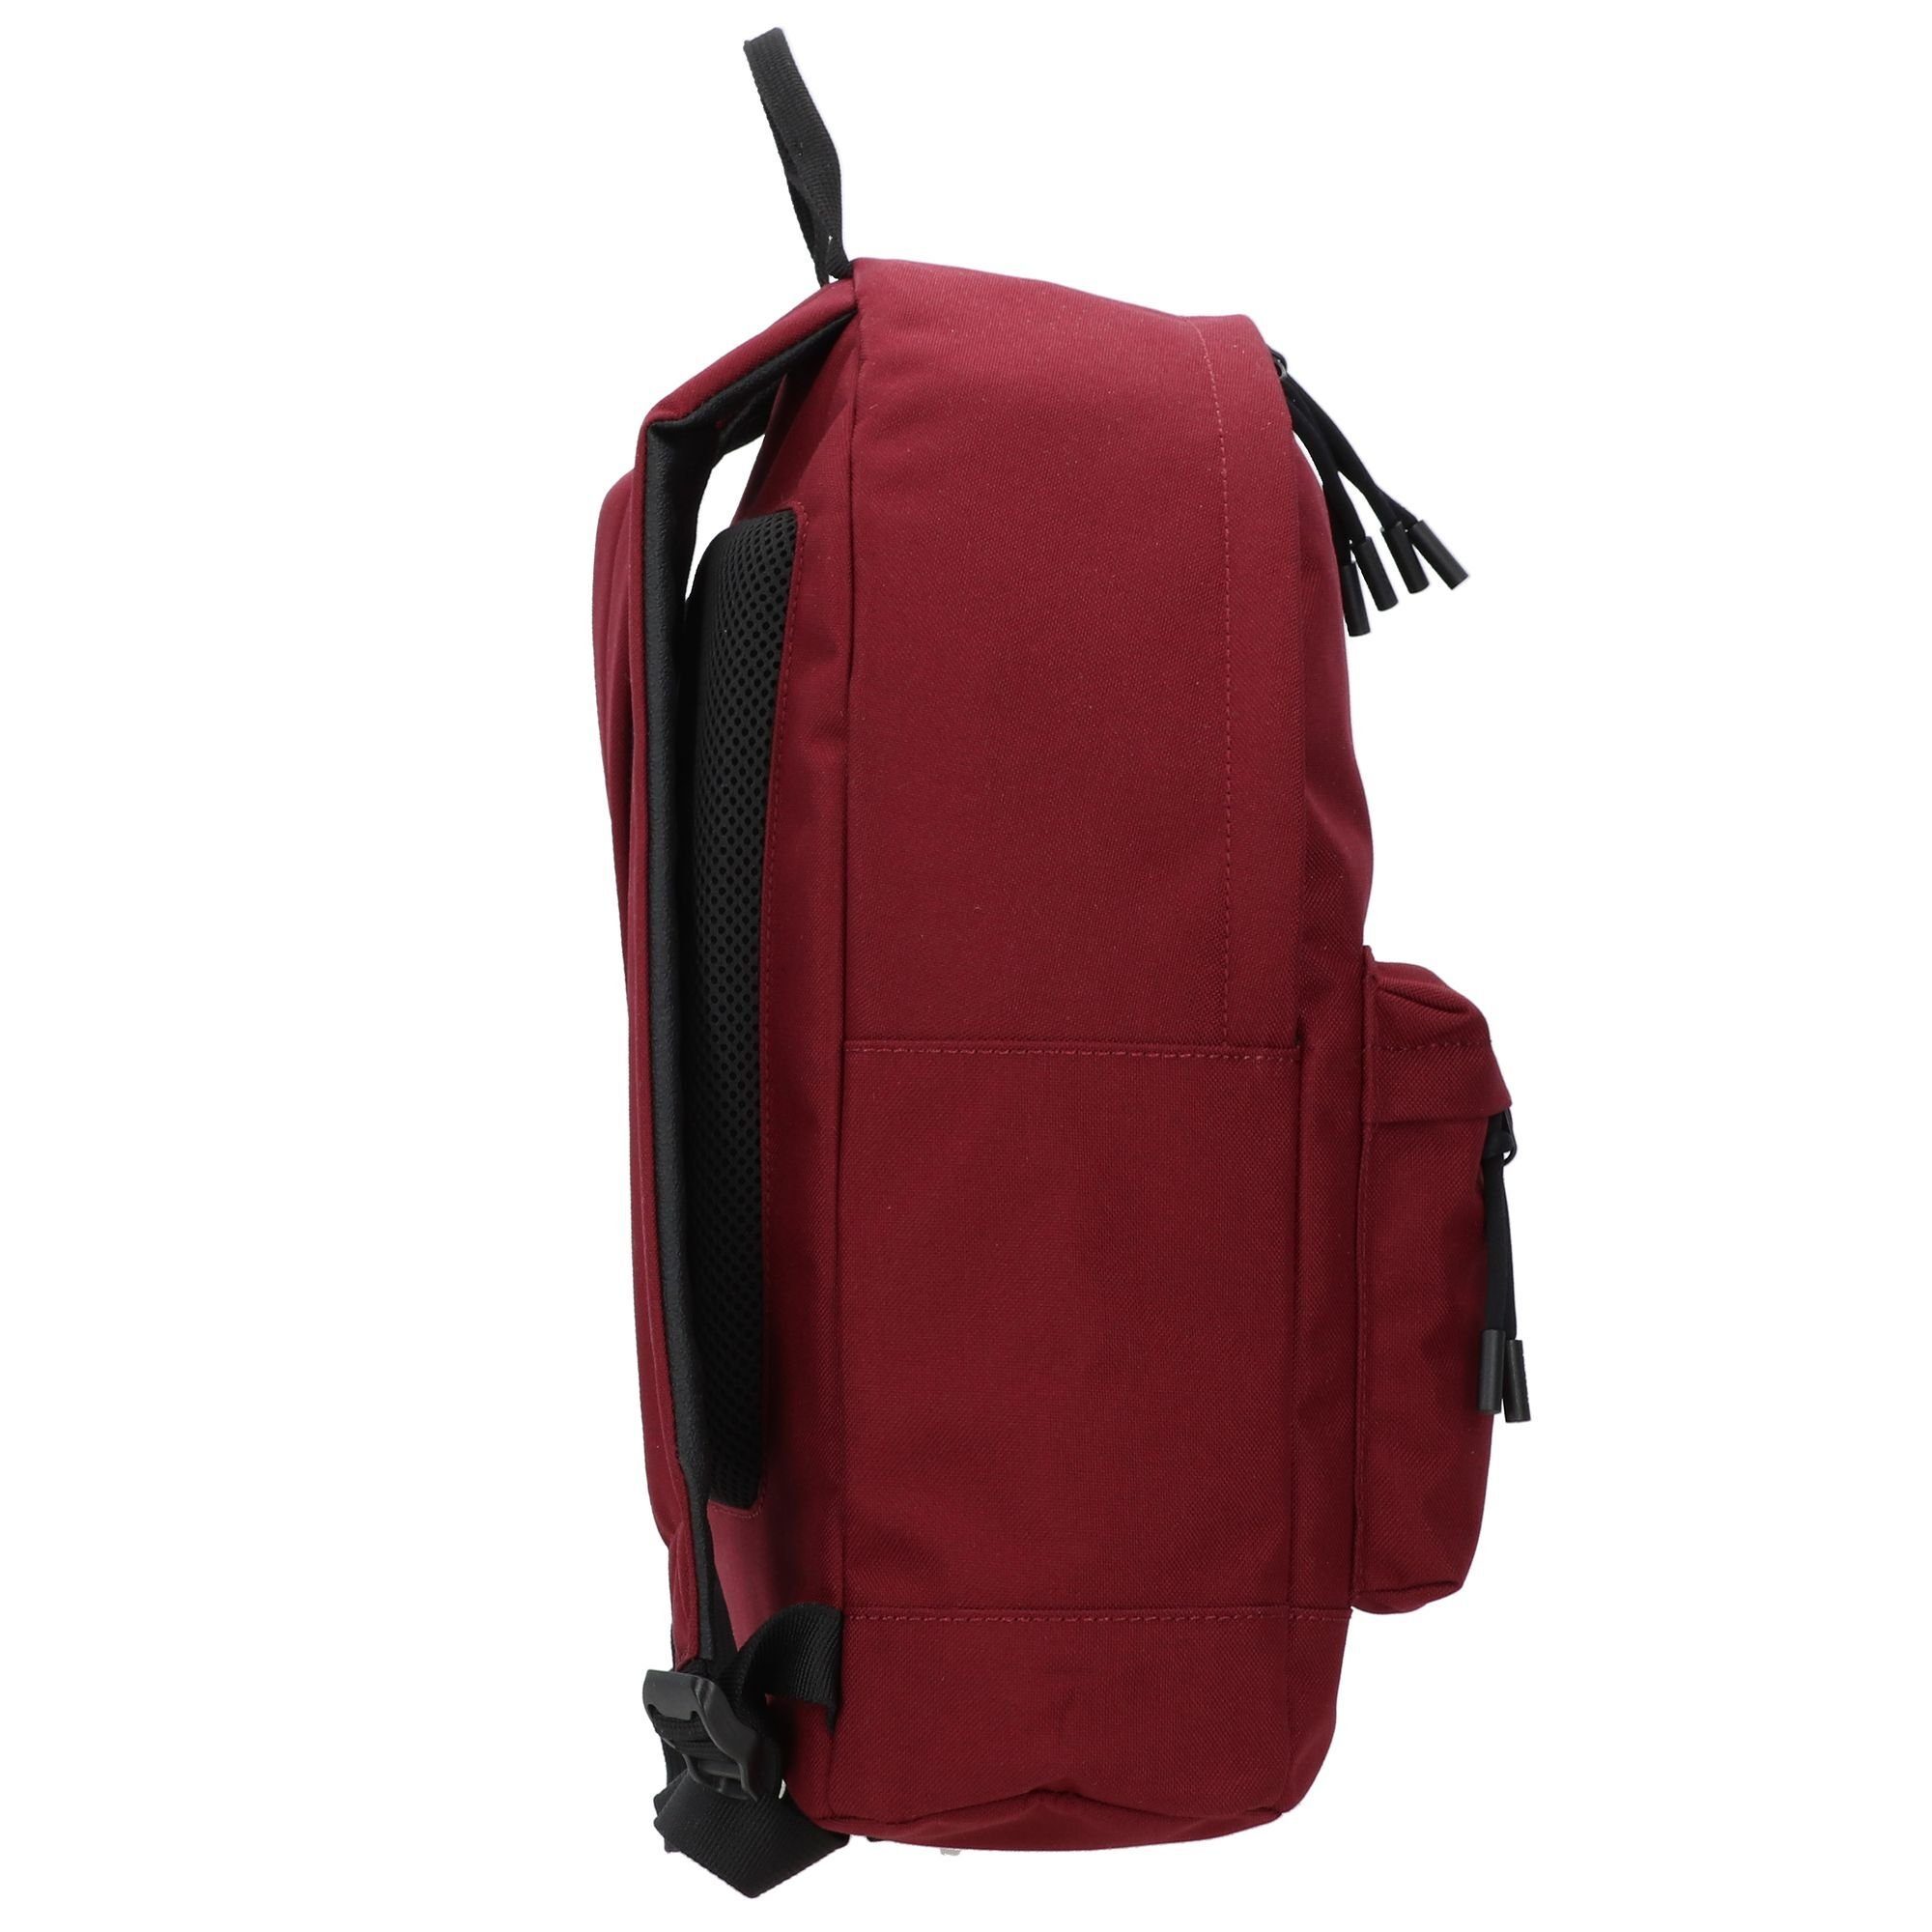 Polyester Lacoste Daypack Neocroc, zin